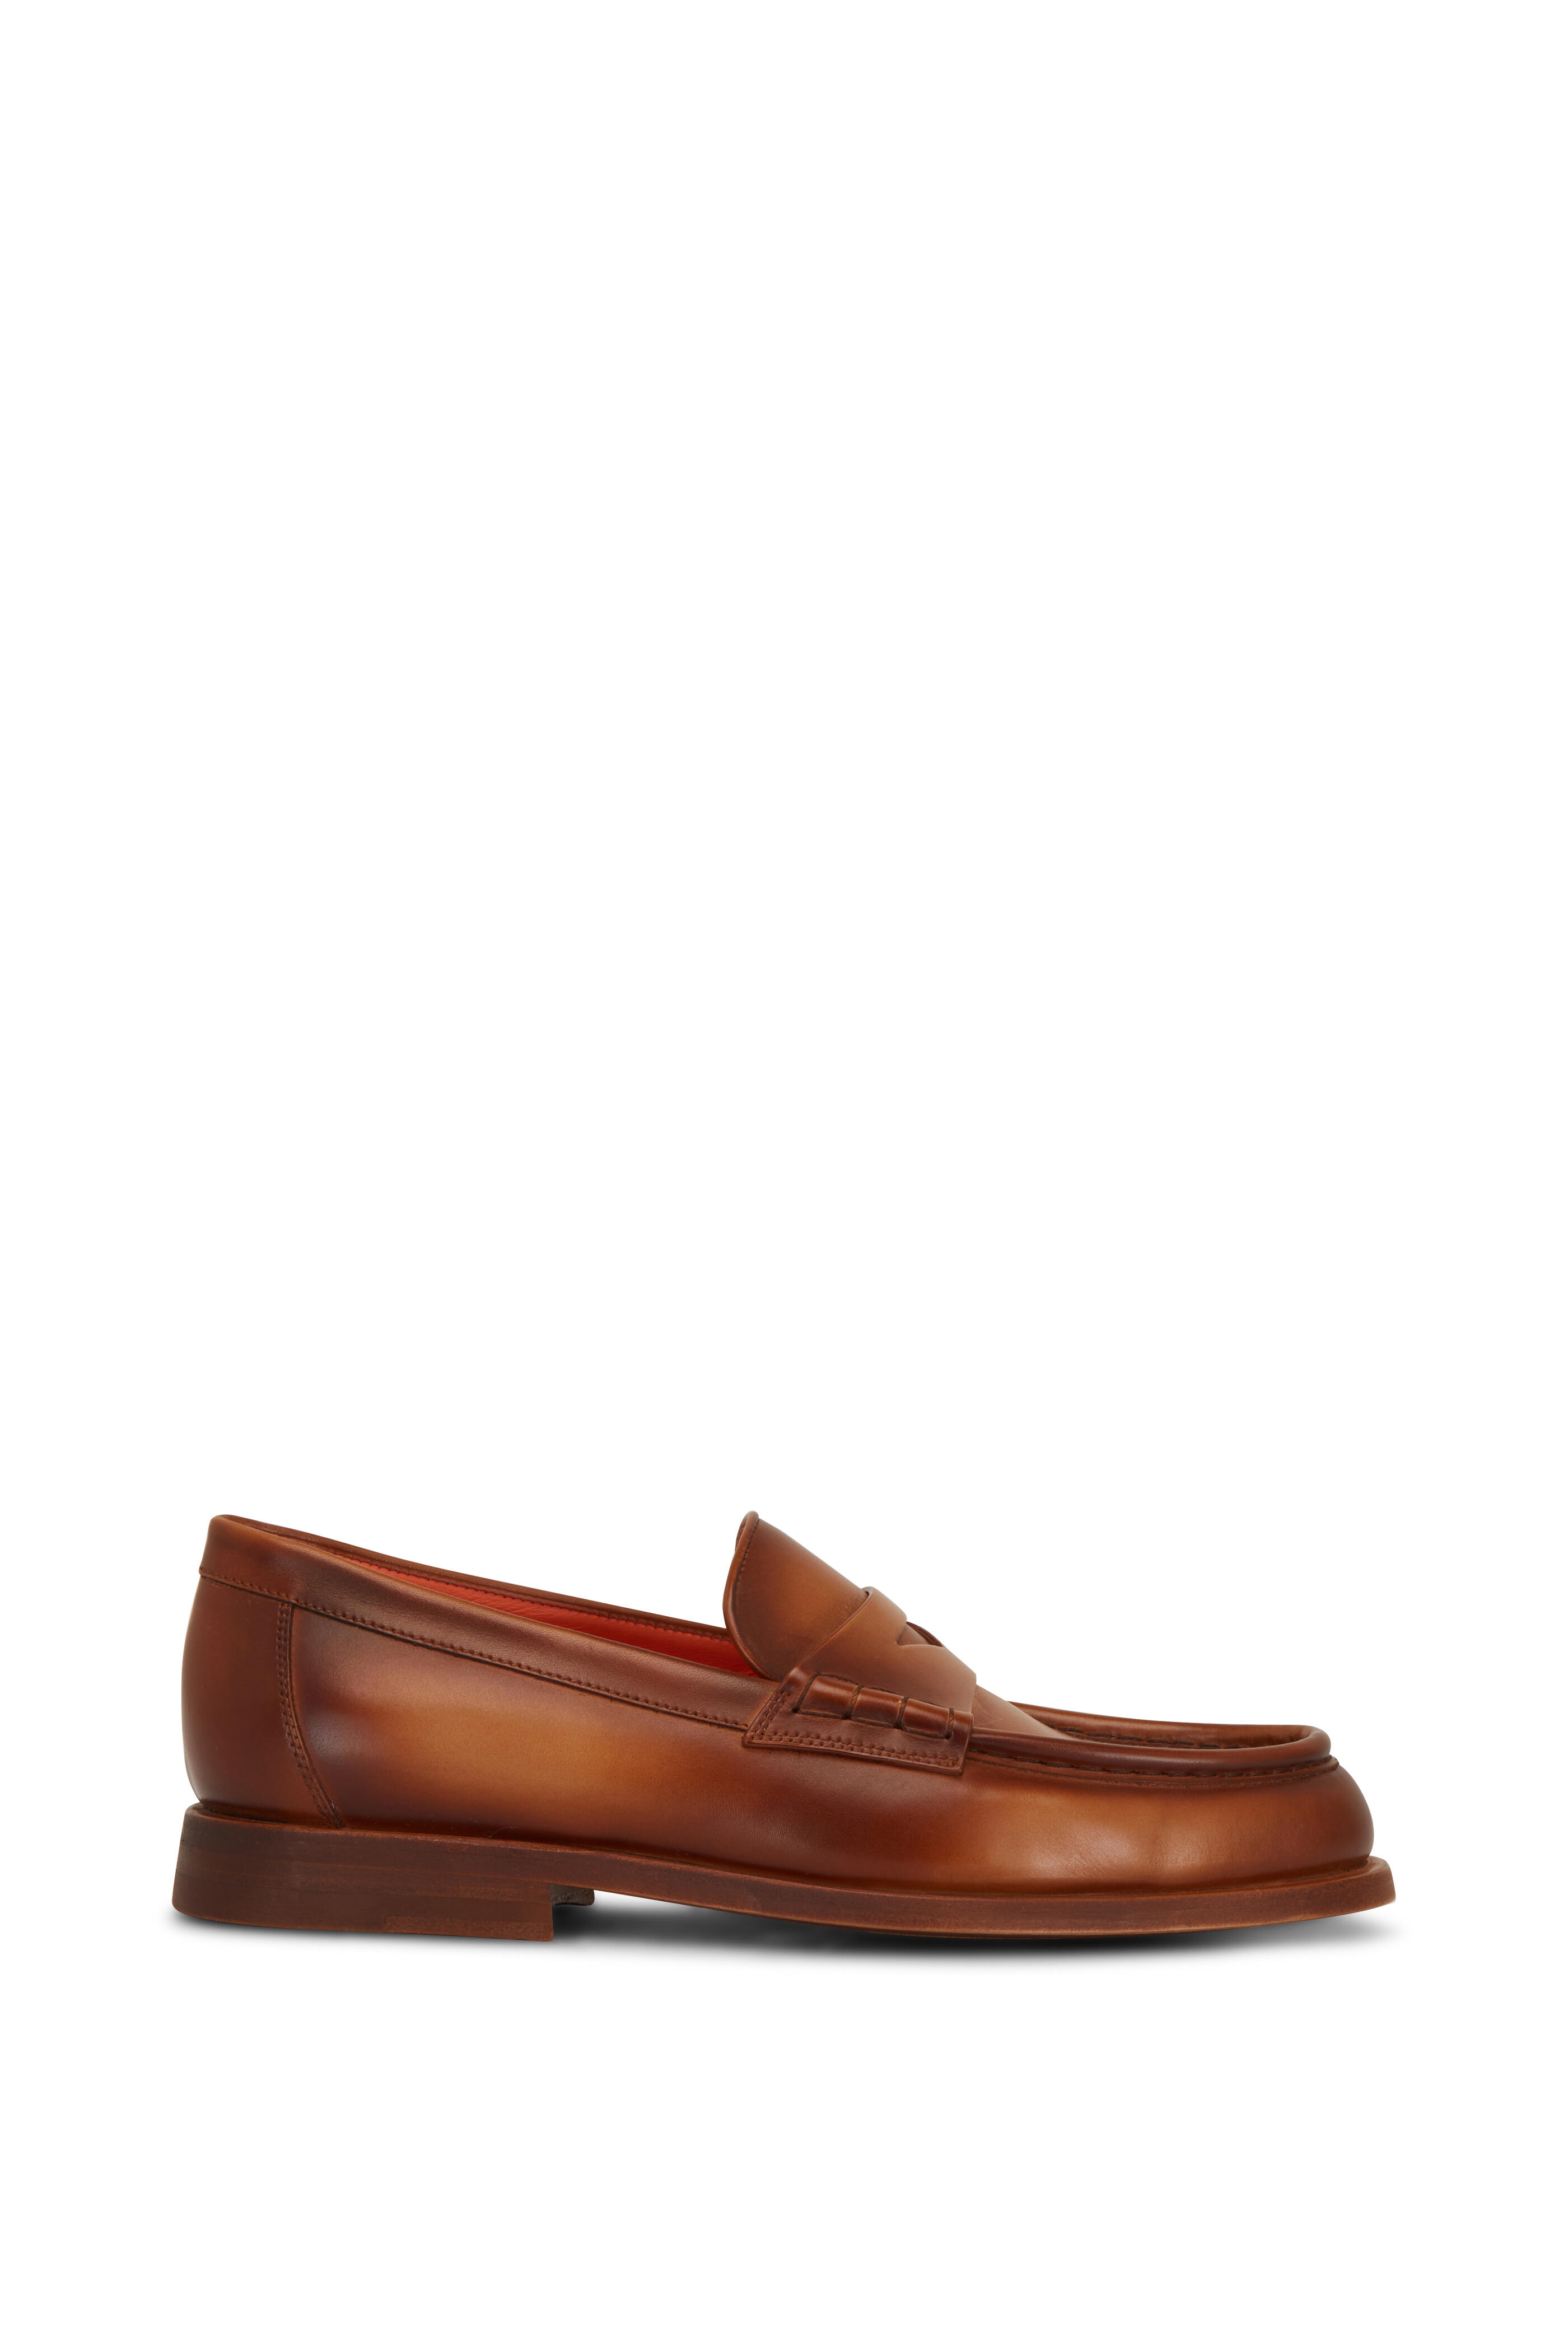 Santoni leather Penny loafers - Brown